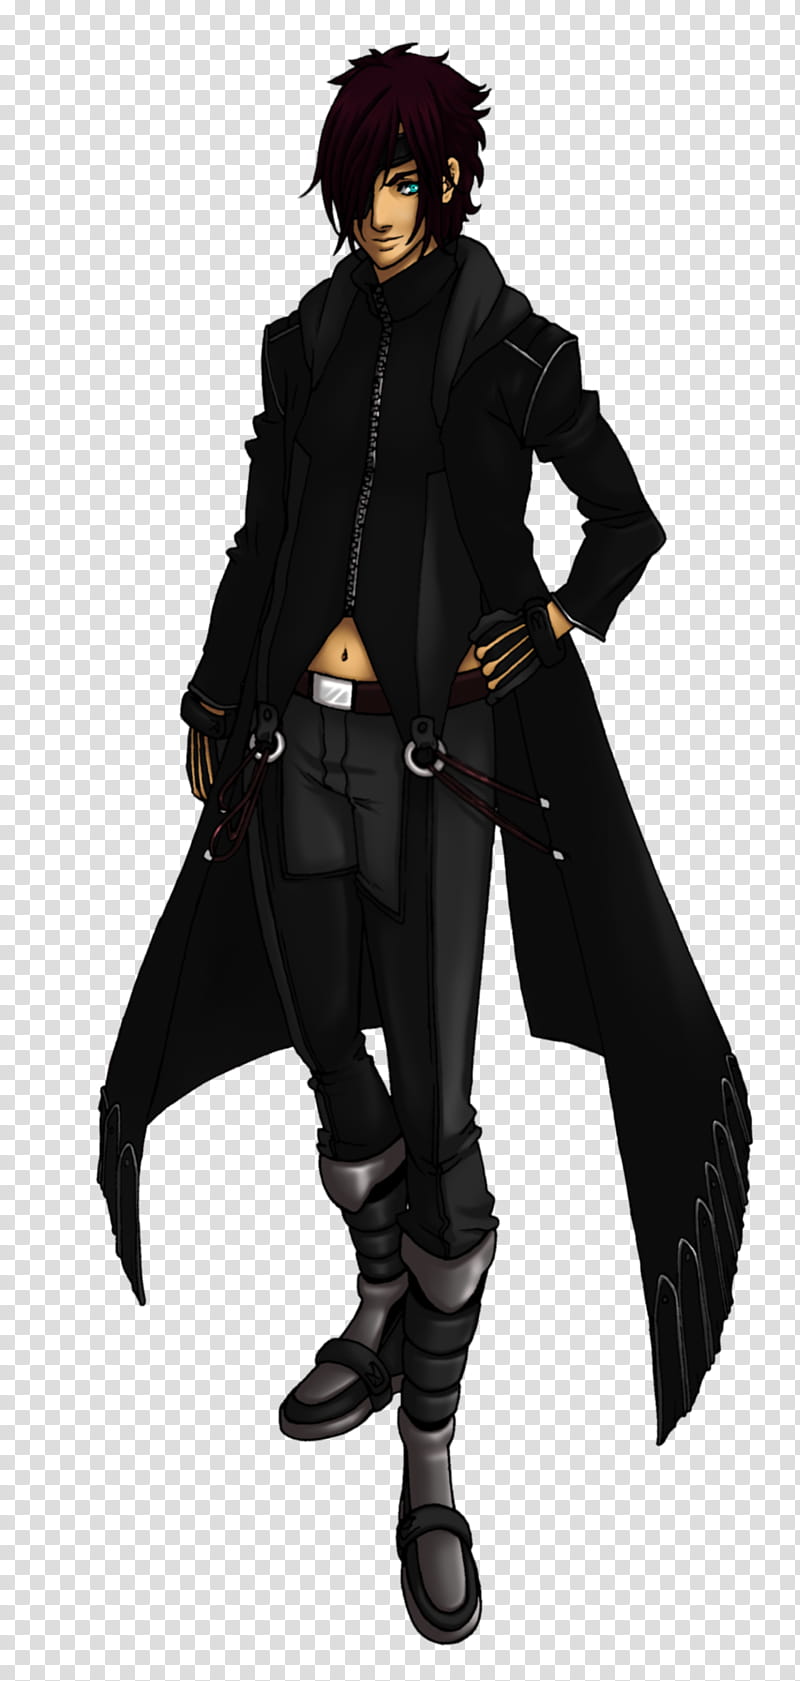 Oc Character Demon Mask, Boy Anime Character In Black Suit Illustration  Transparent Background Png Clipart | Hiclipart